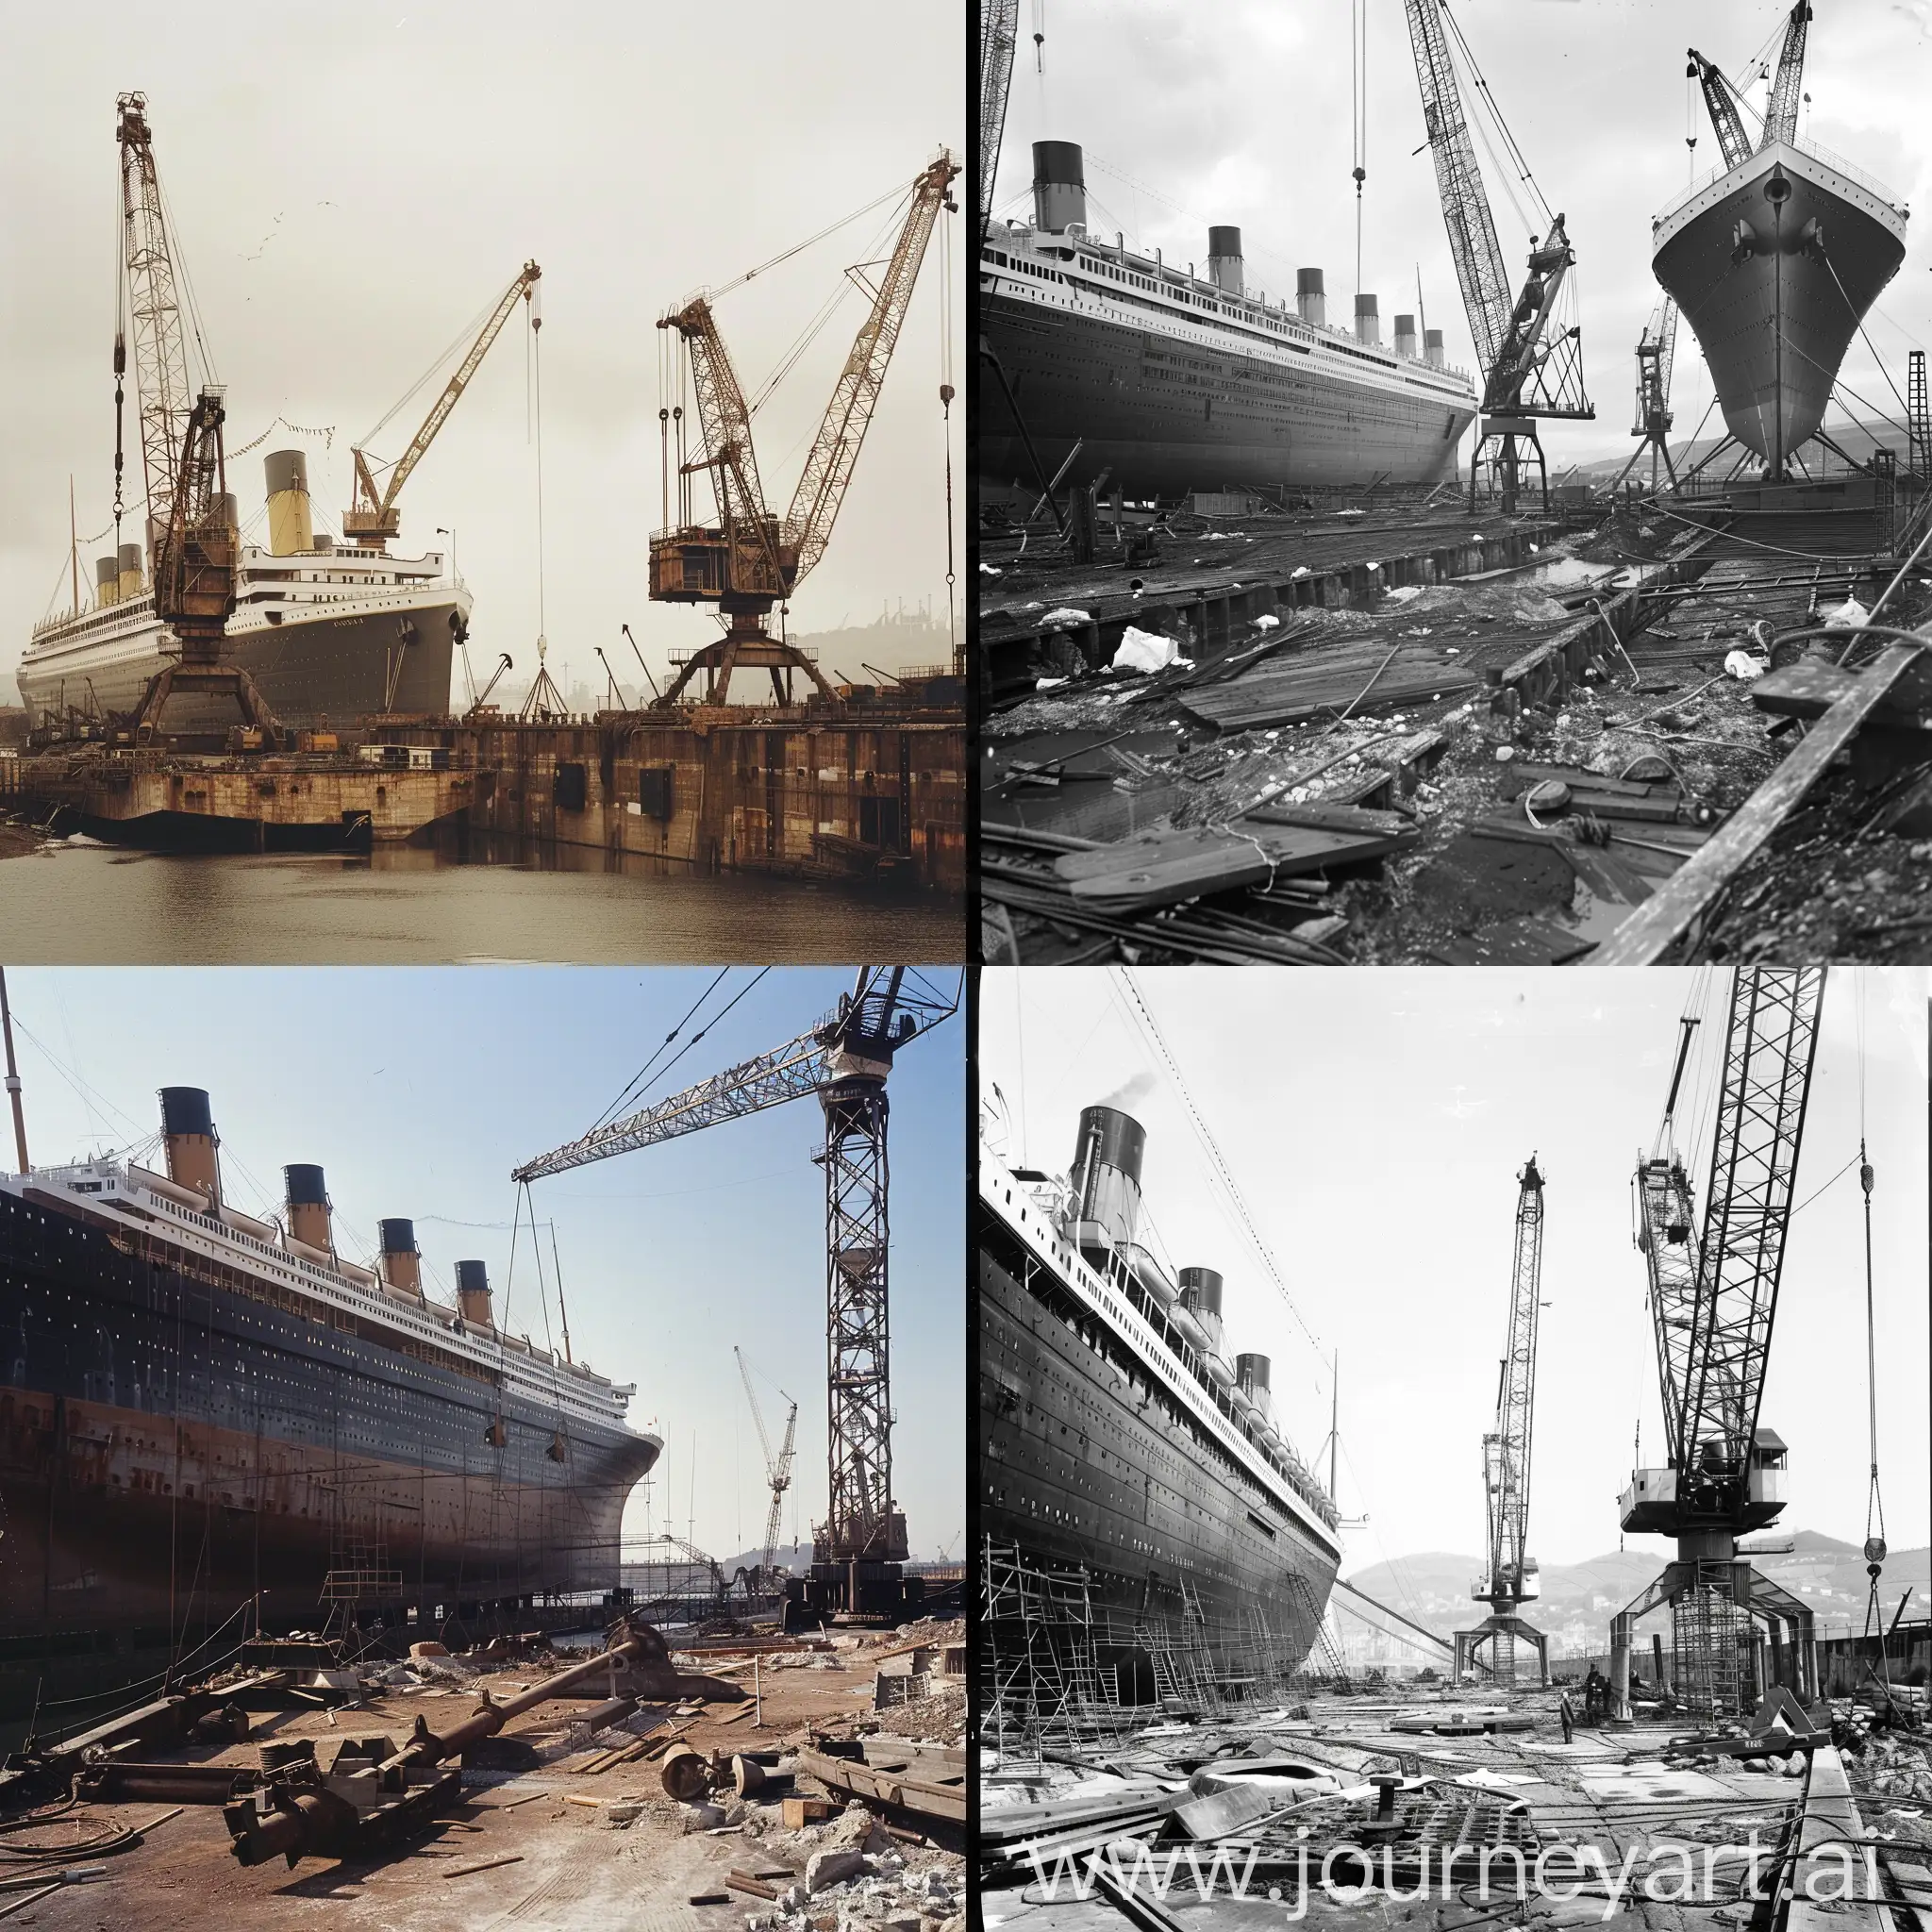 Photograph of A shipyard, a replica of the British Liner RMS Titanic being build, cranes besides the ship, early 2010s photograph.